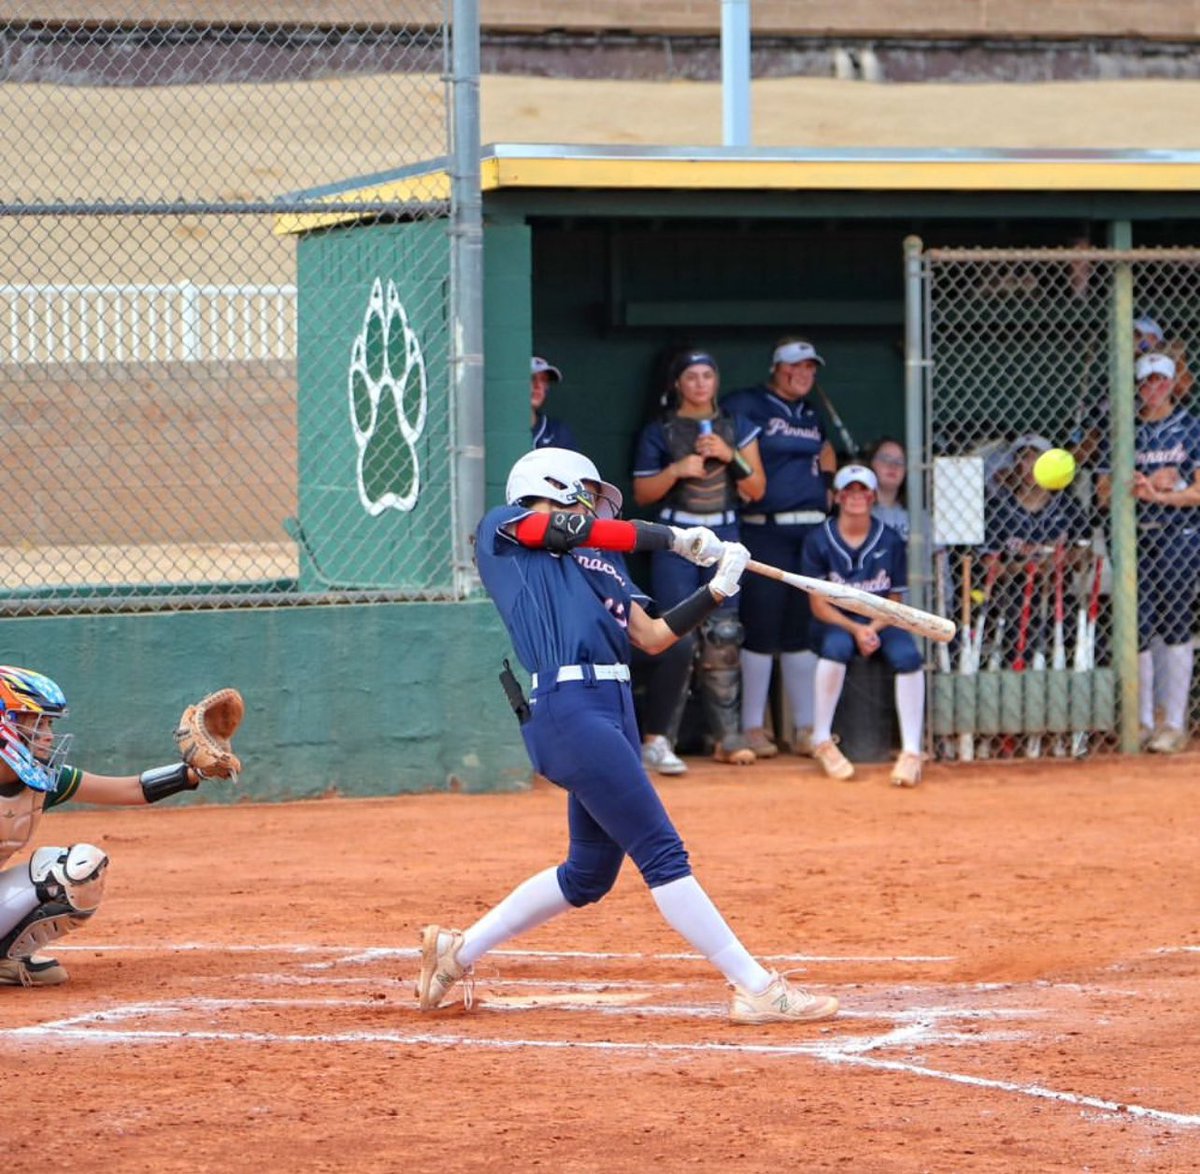 Sienna Caro 💪🏻👑🥎 AZ Storm National Mathis 18u
- PGF ALL- American game finalist c/o 2026
- 4.3 GPA
- .395 Batting AVG
- 73 RBI’s on 64 hits
- 13 2B, 5 3B, & 12 HR as a sophomore
- SLG .883 with a 1.315 OPS

#strongtogether
#stormplayersreadyforcollege
#aprovenmodelthatworks